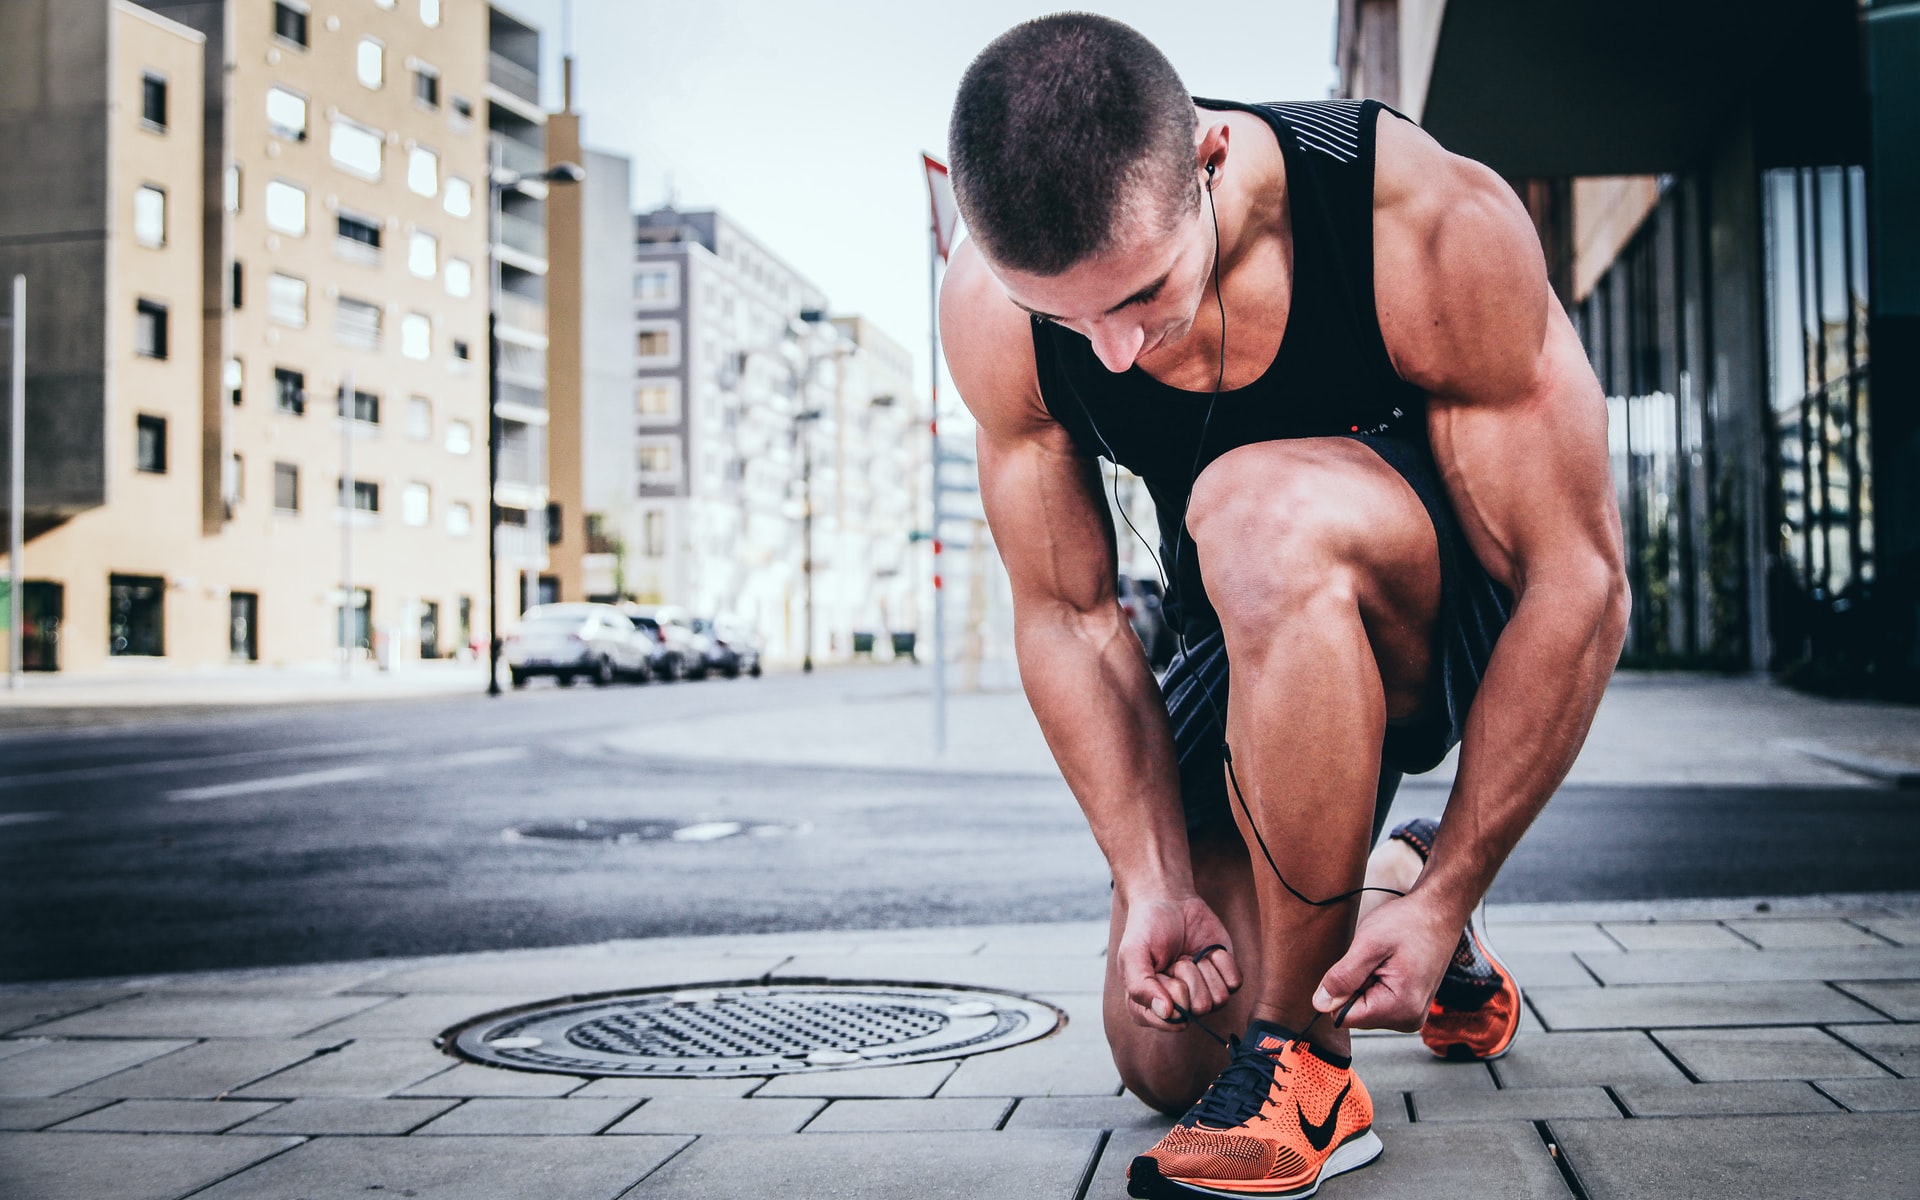 fit and healthy person crouched down in empty street, tying shoelaces ready for exercising